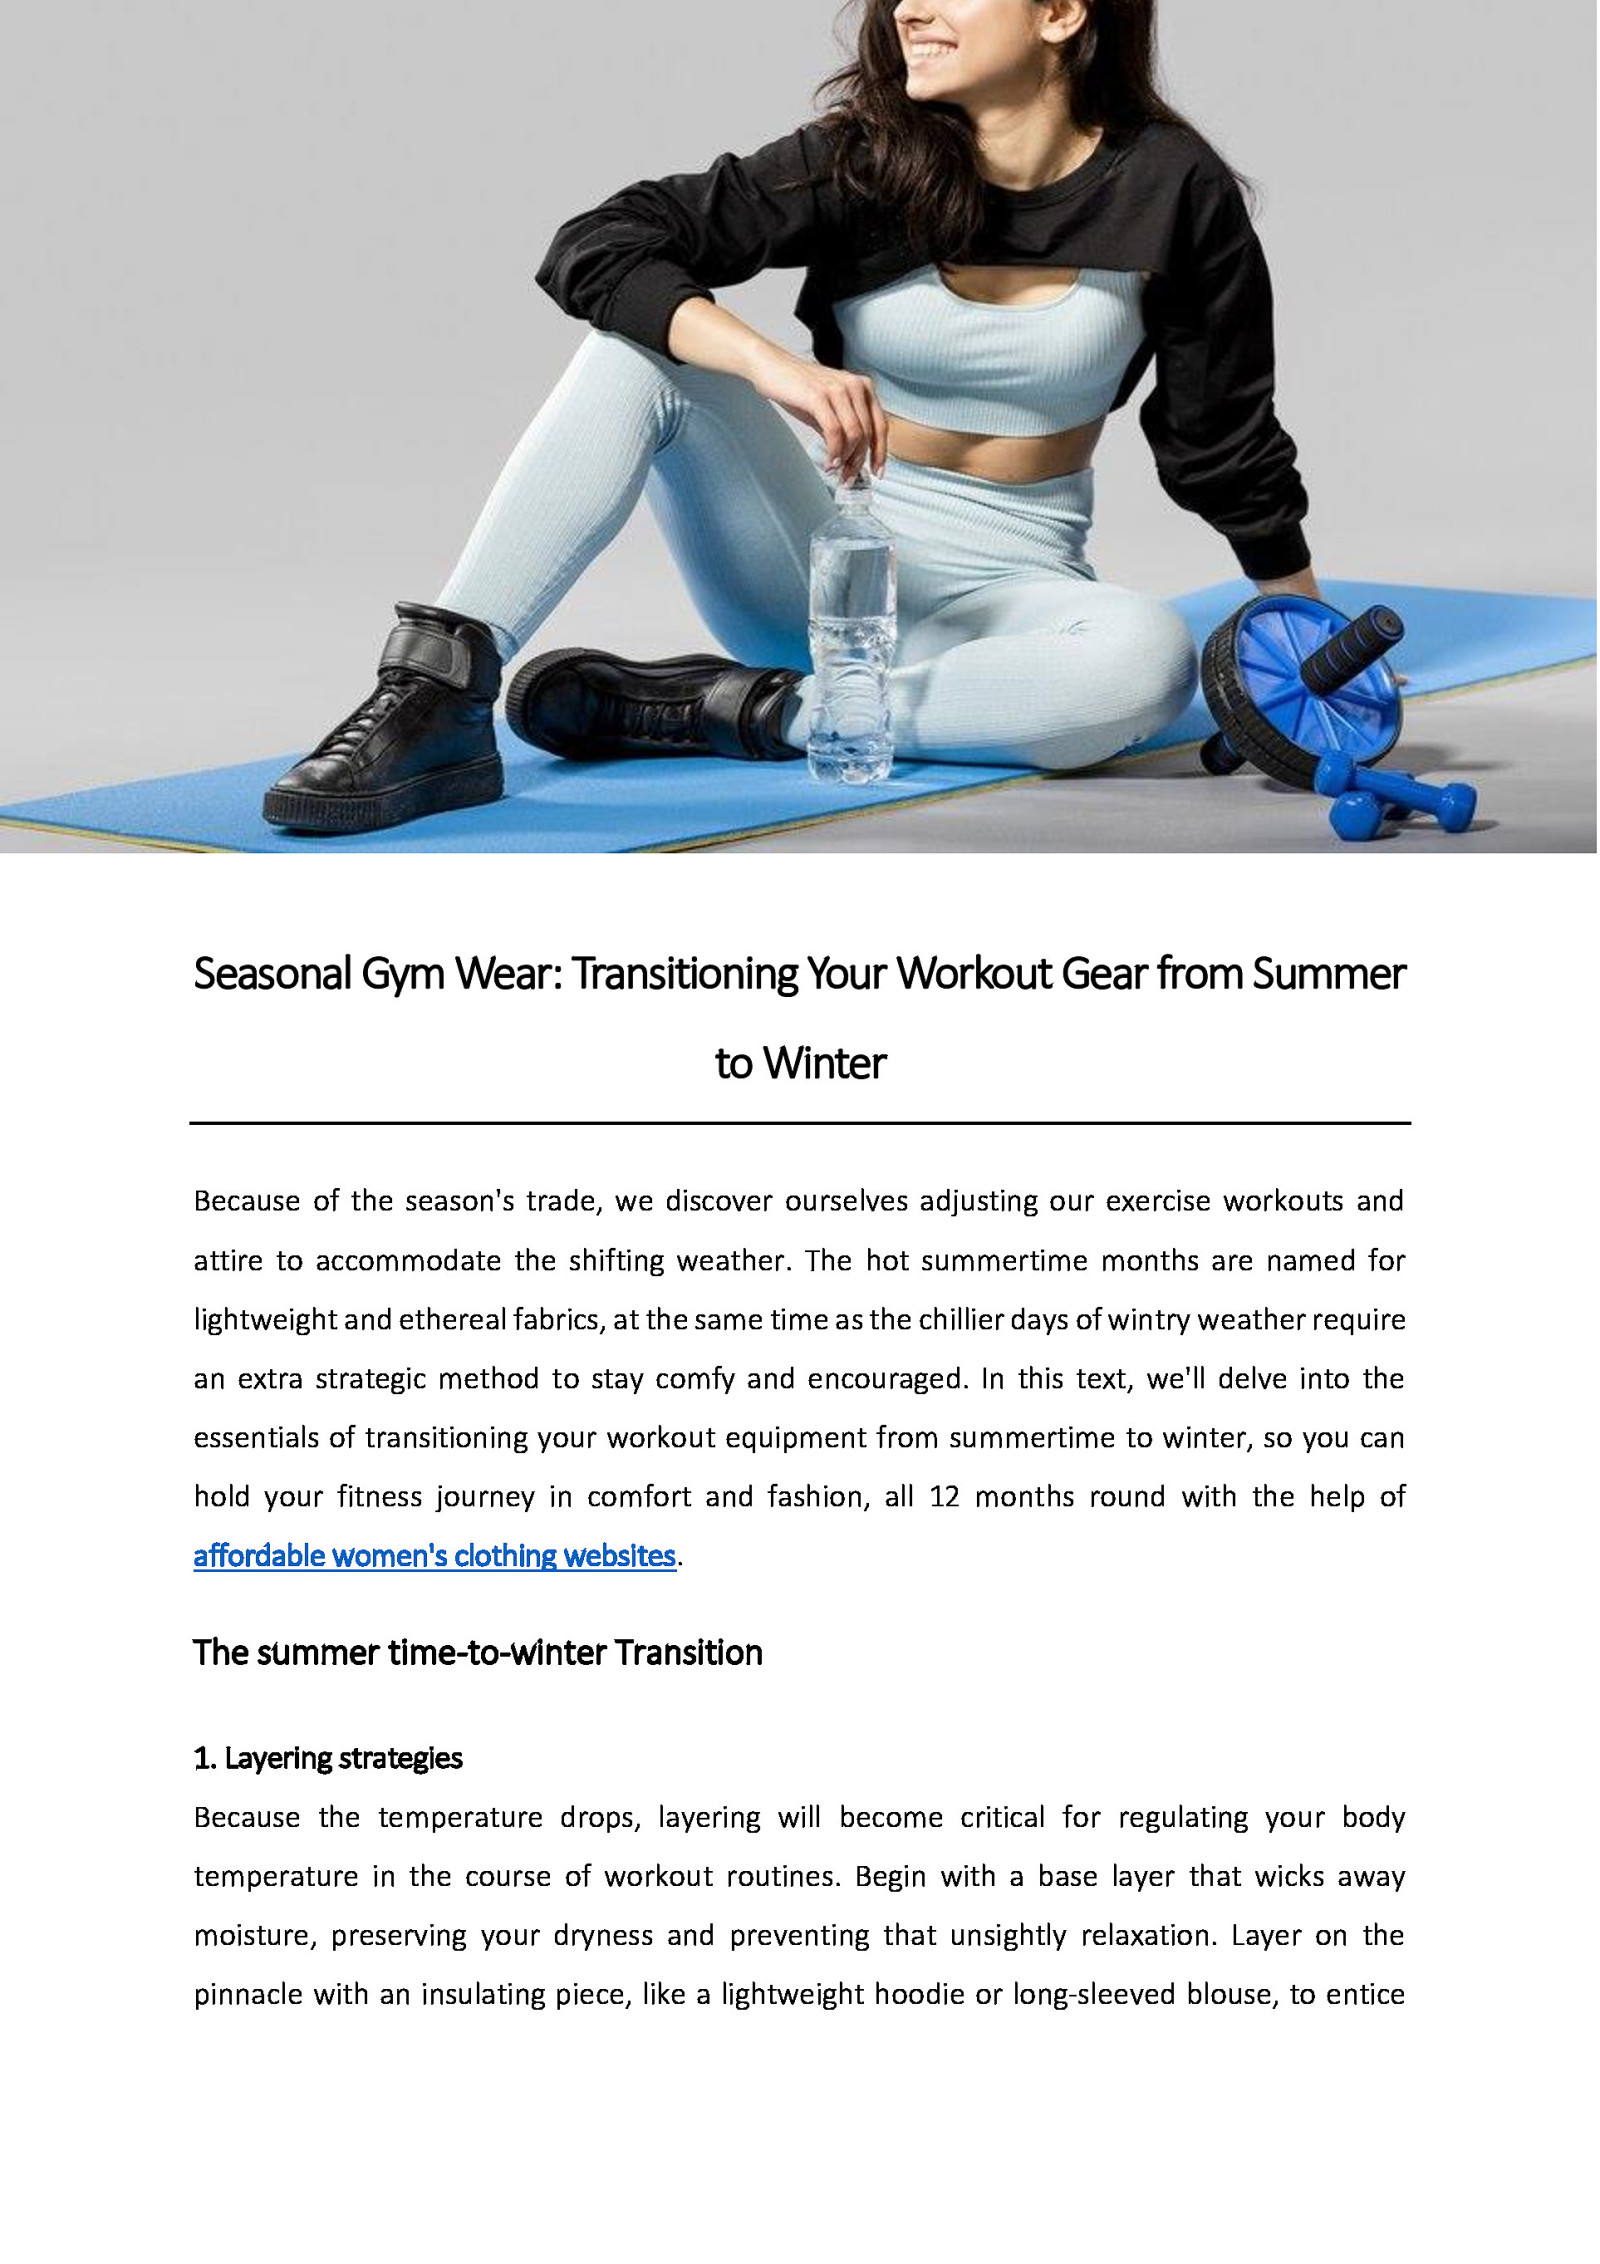 Seasonal Gym Wear: Transitioning Your Workout Gear from Summer to Winter